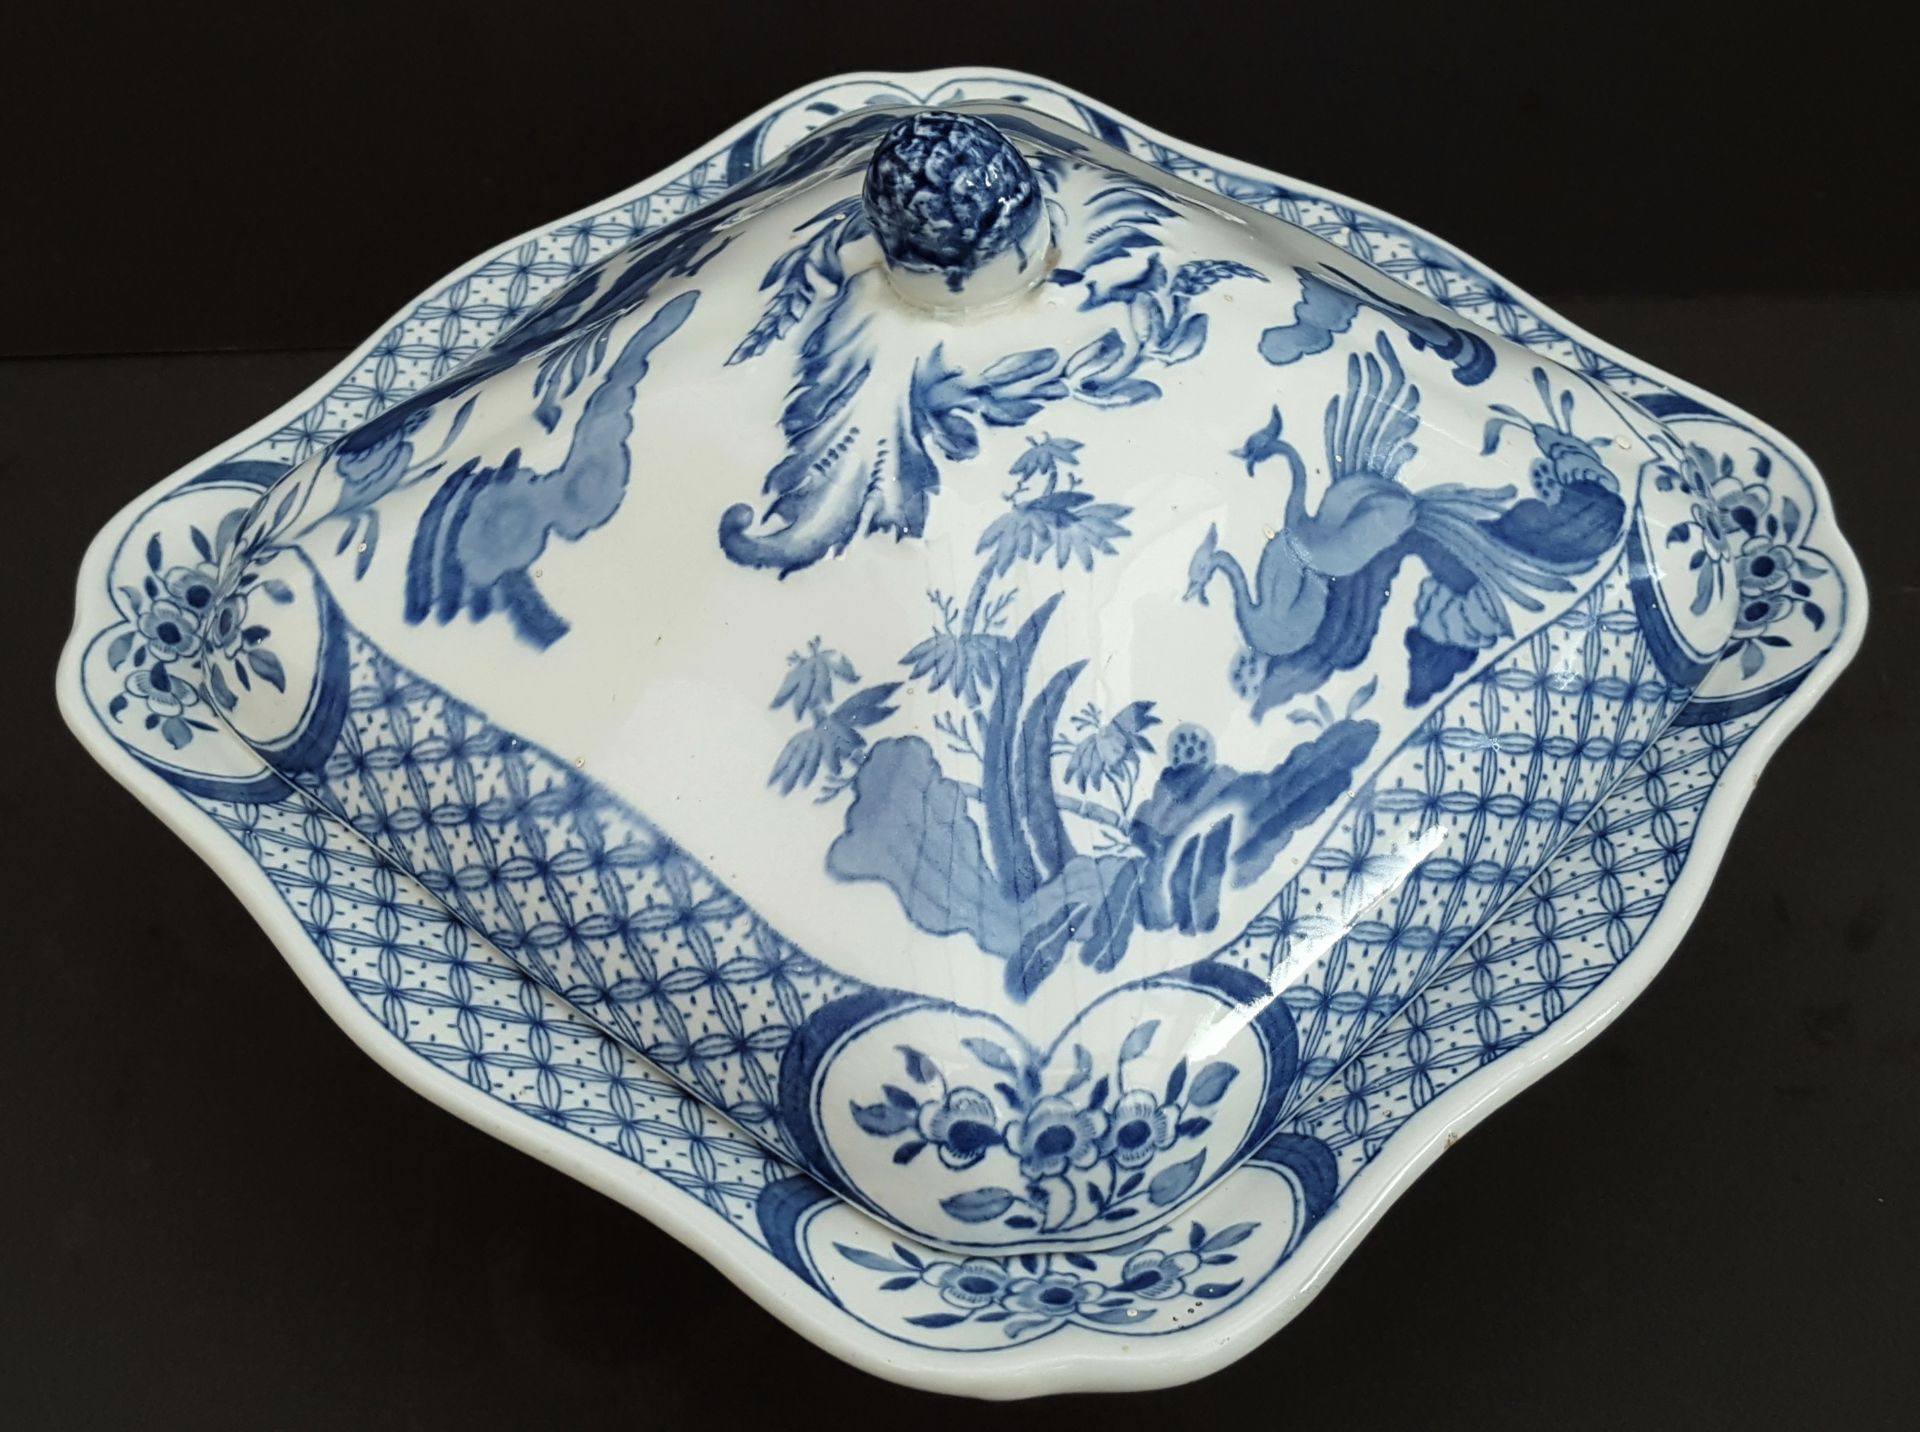 Collection of Blue & White Furnivals Ltd Old Chelsea China Total Of 7 Pieces Reg No c1913 - Image 3 of 5